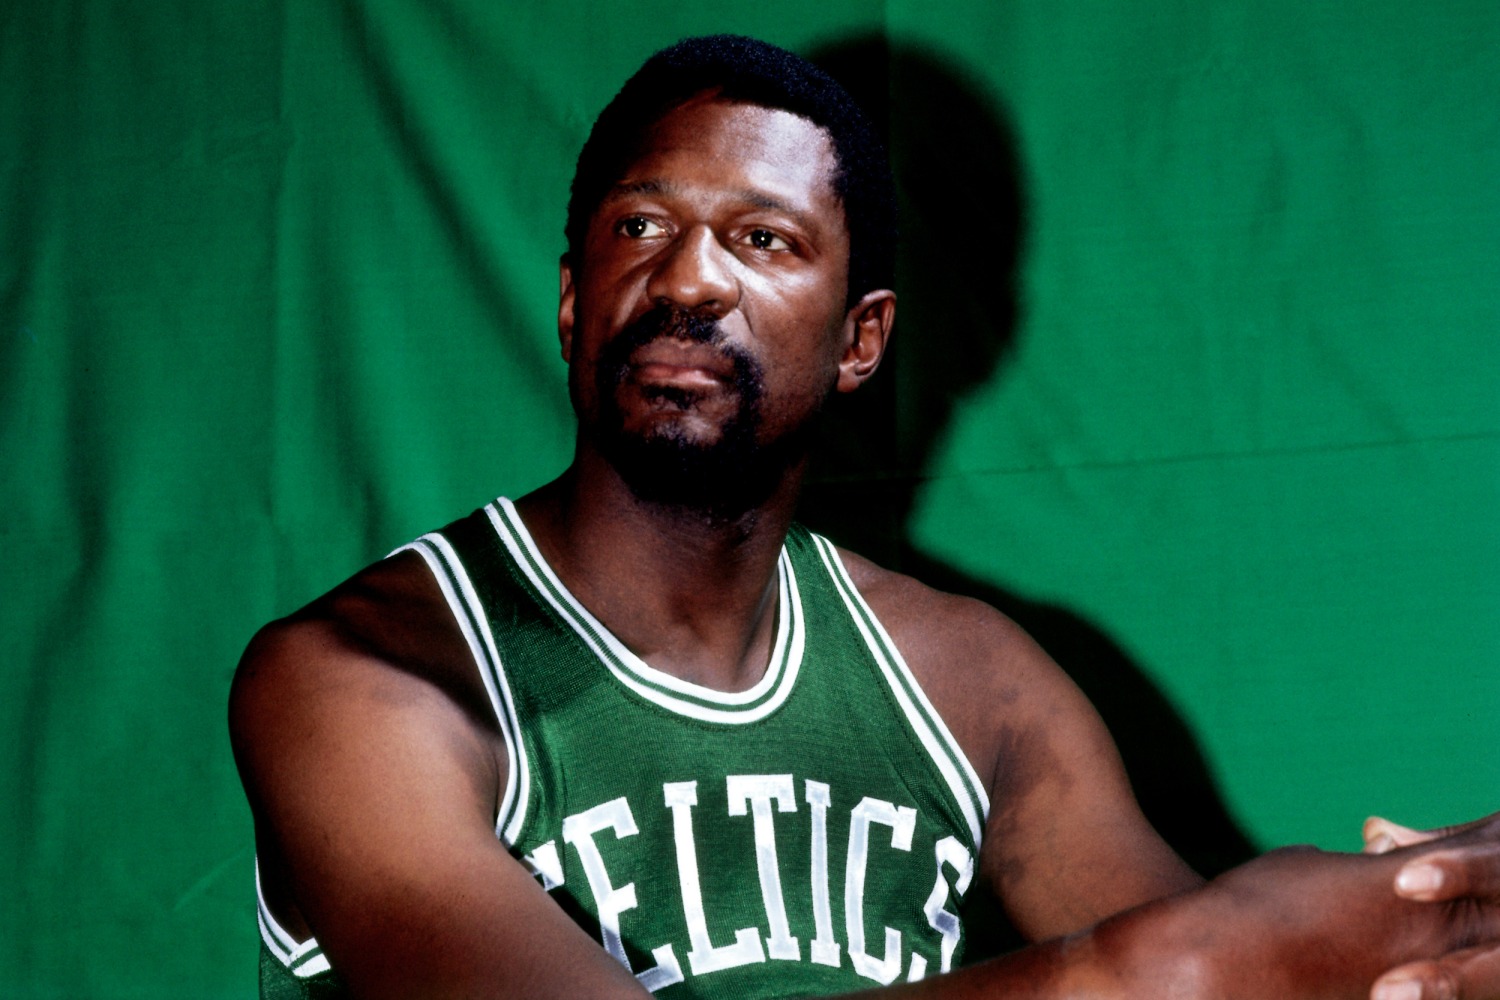 Lakers leave Celtics rivalry aside to honor Bill Russell's legendary No.6